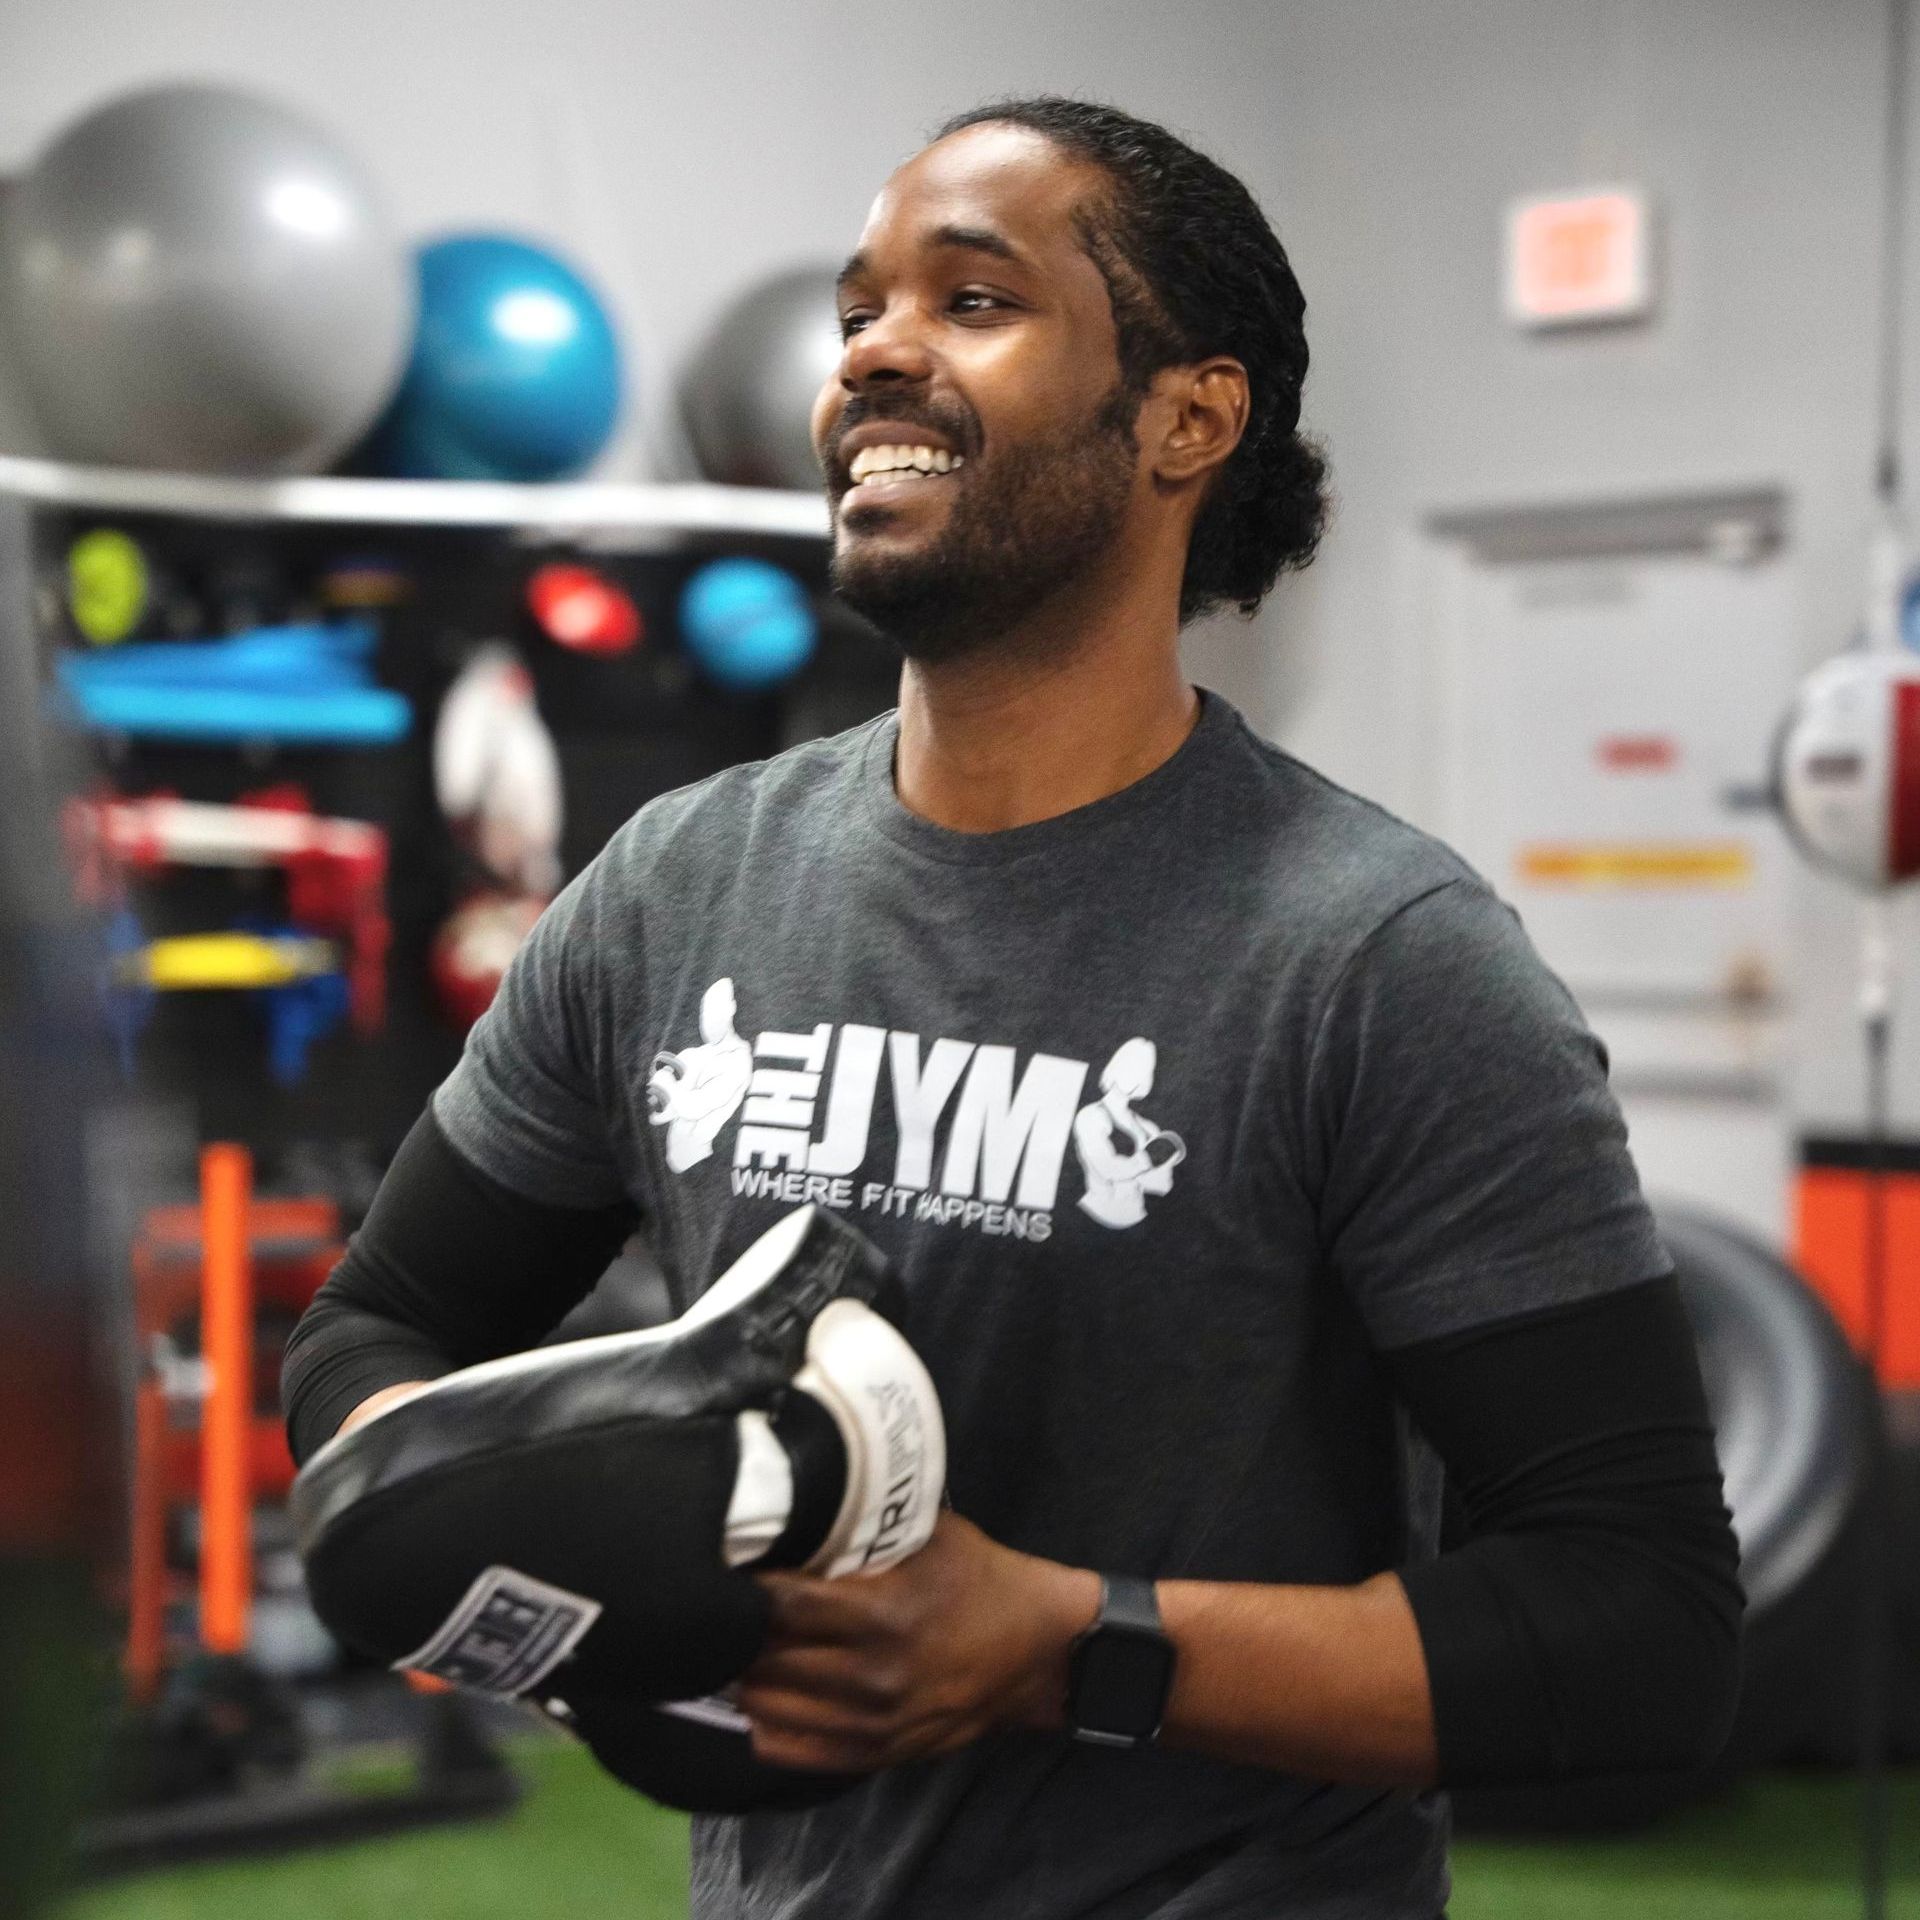 Moe Omar holding boxing glove while smiling